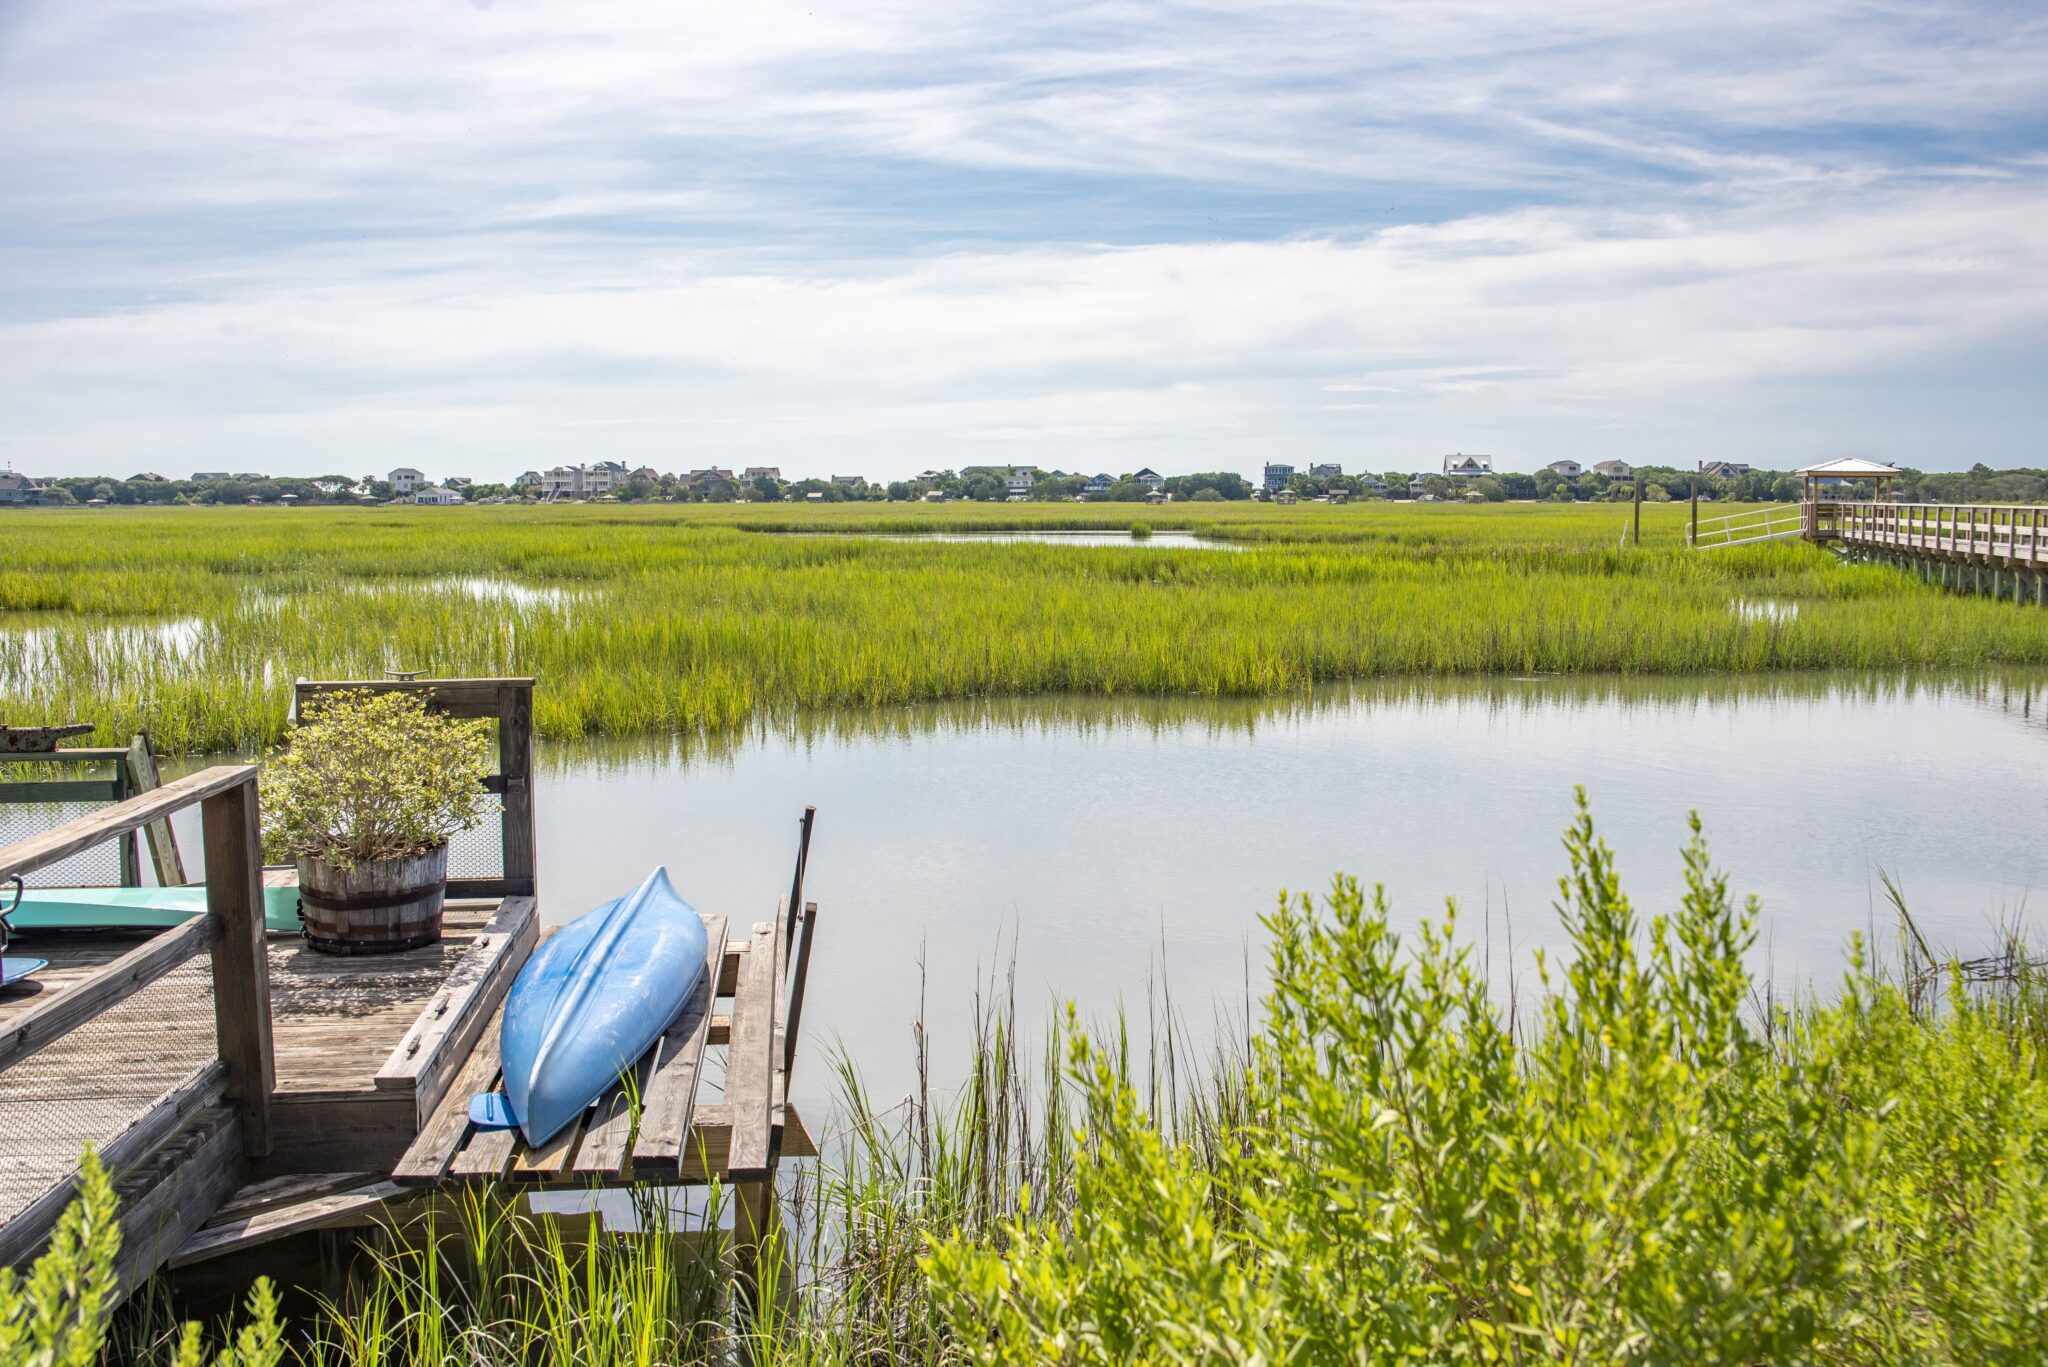 Vacation Guide: Things to Do on Pawleys Island - Bask Away